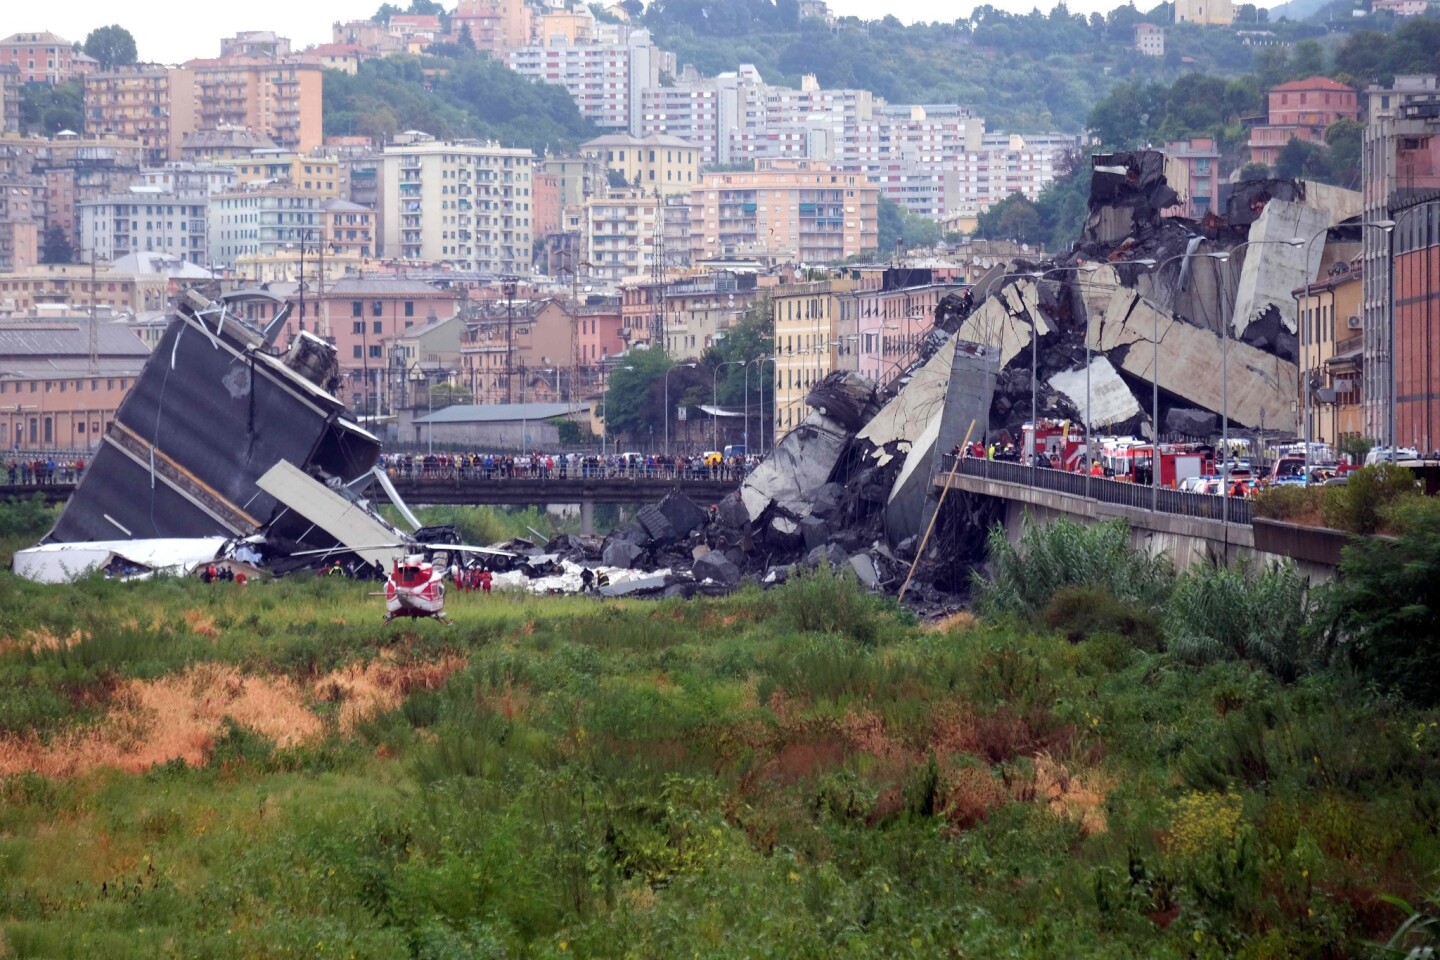 Rescuers scouring through the wreckage after part of a viaduct of the A10 freeway collapsed in Genoa, Italy.